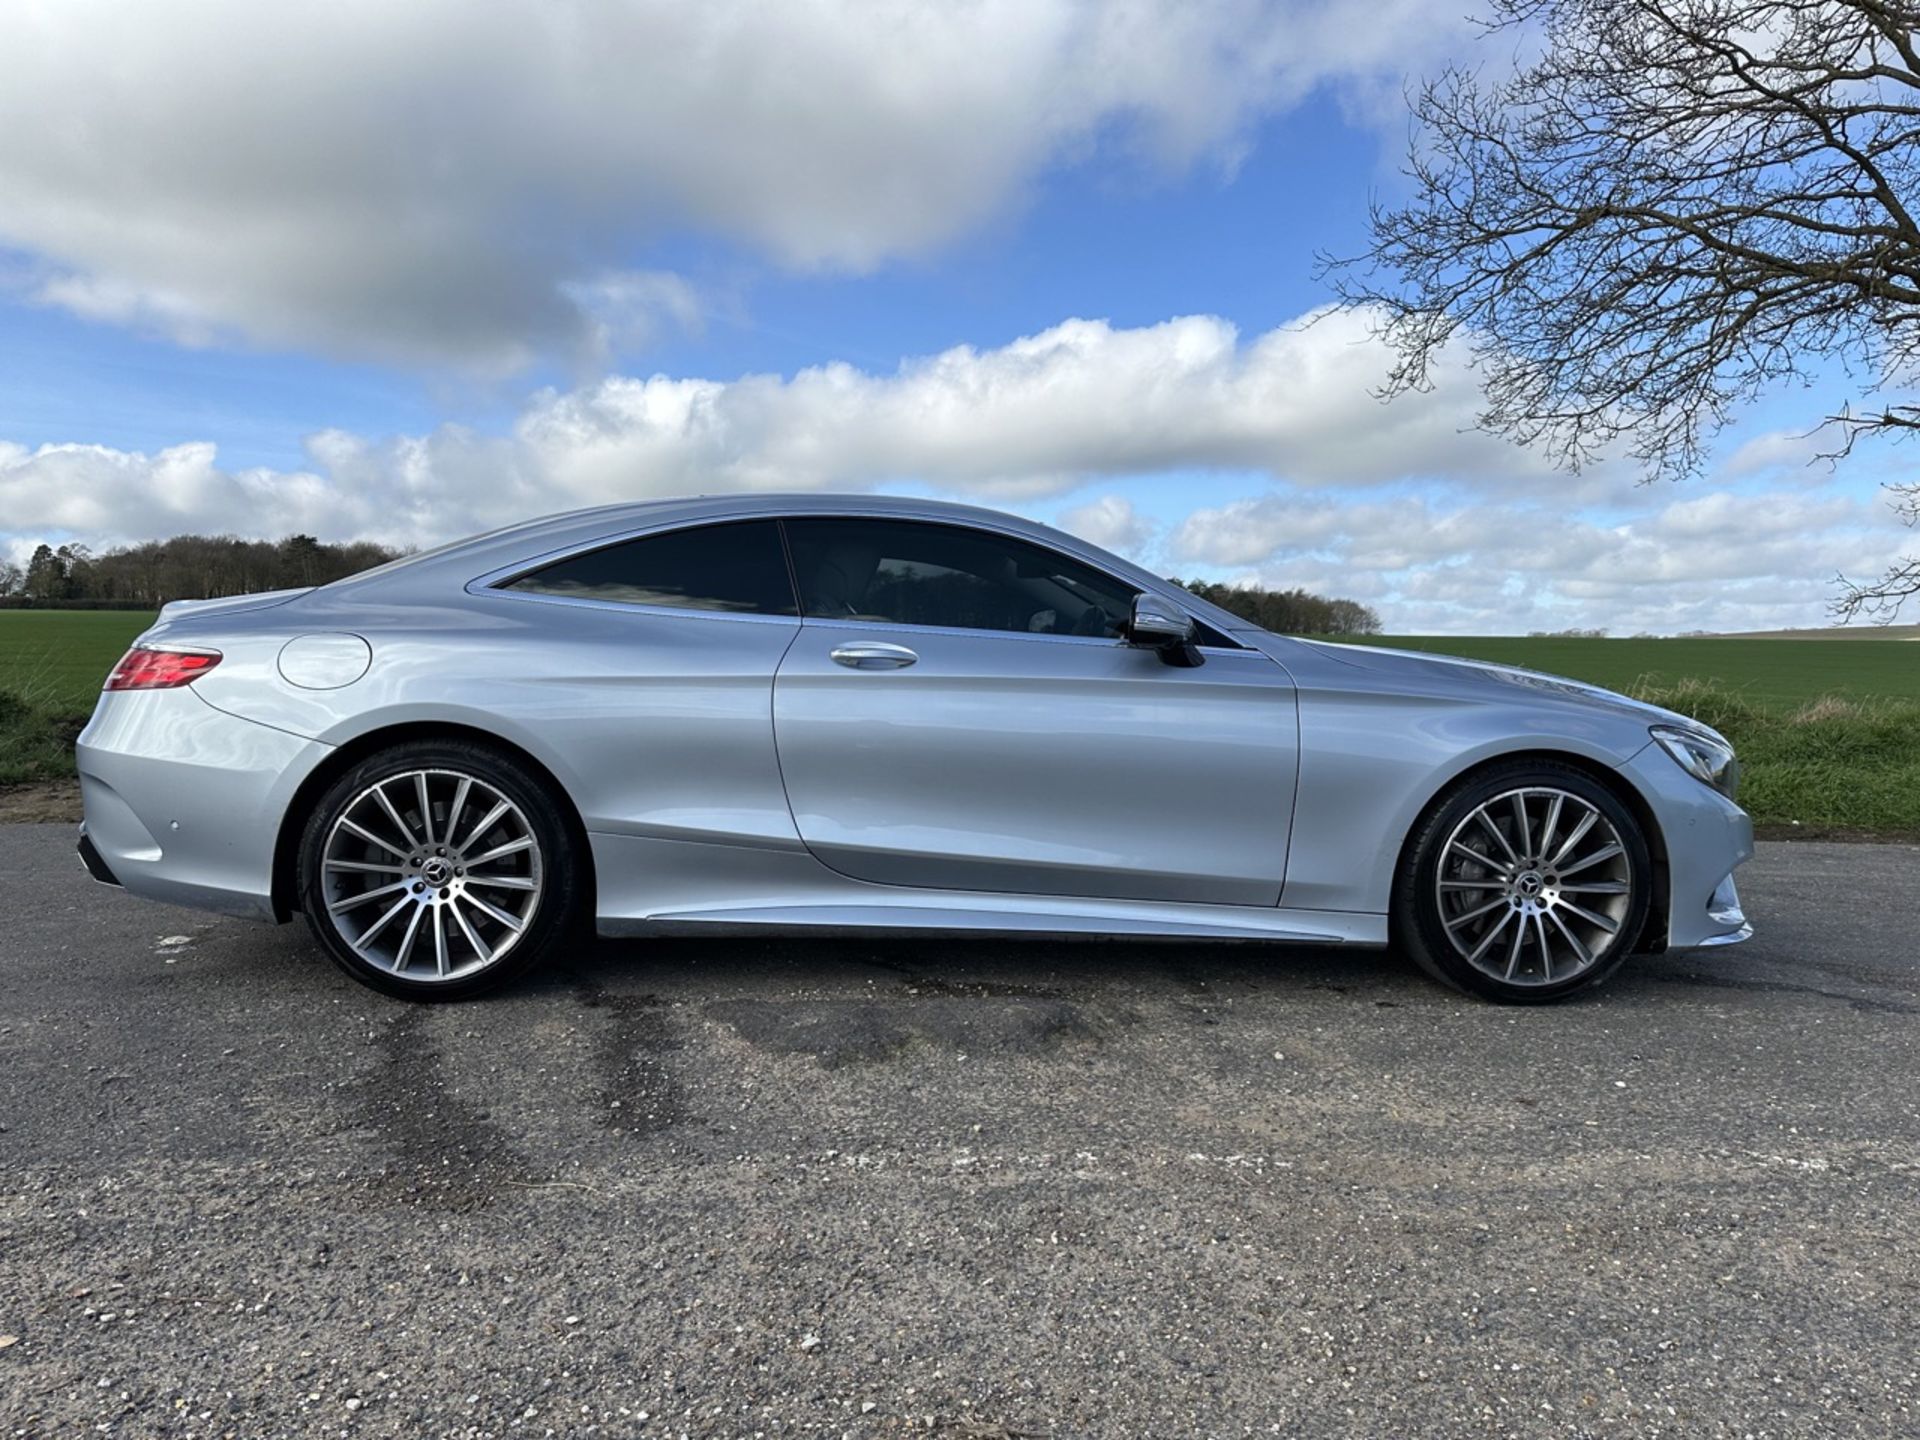 MERCEDES-BENZ S CLASS S500 AMG Line Premium 2dr Auto - Automatic - 2018 - Coupe - 88K miles Full SH - Image 15 of 30